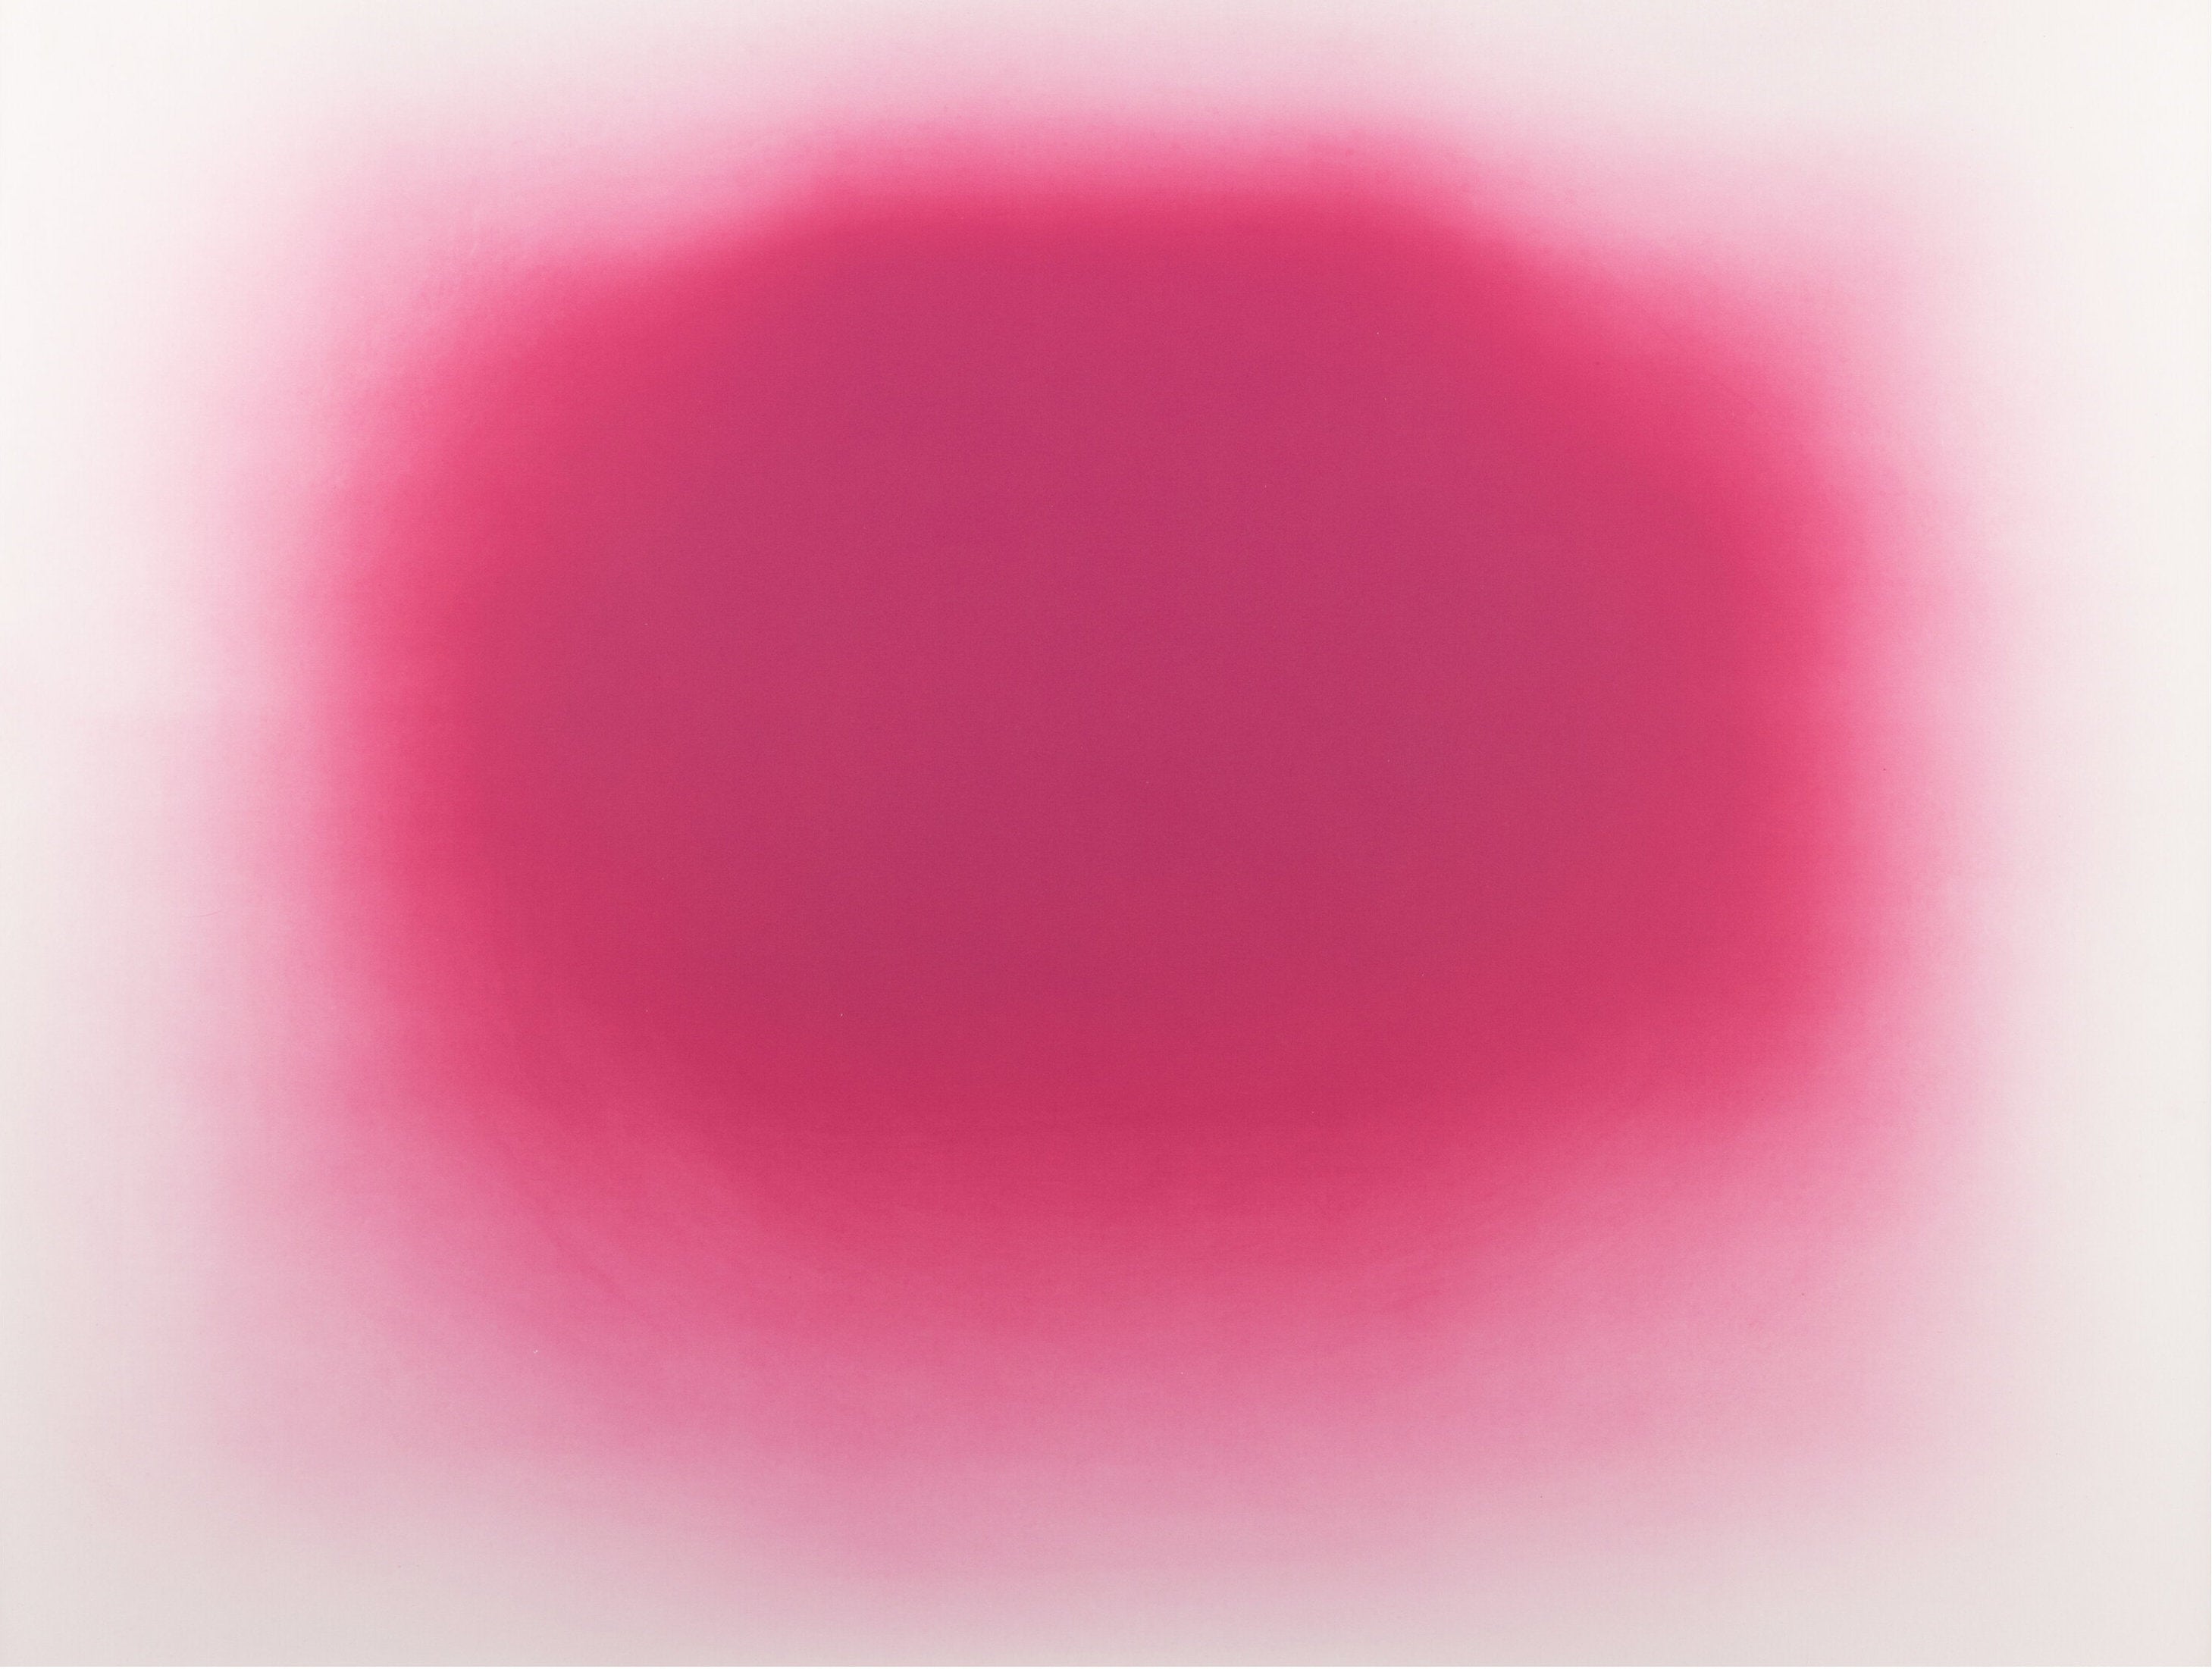 Untitled (Pink), from Flow, 2019